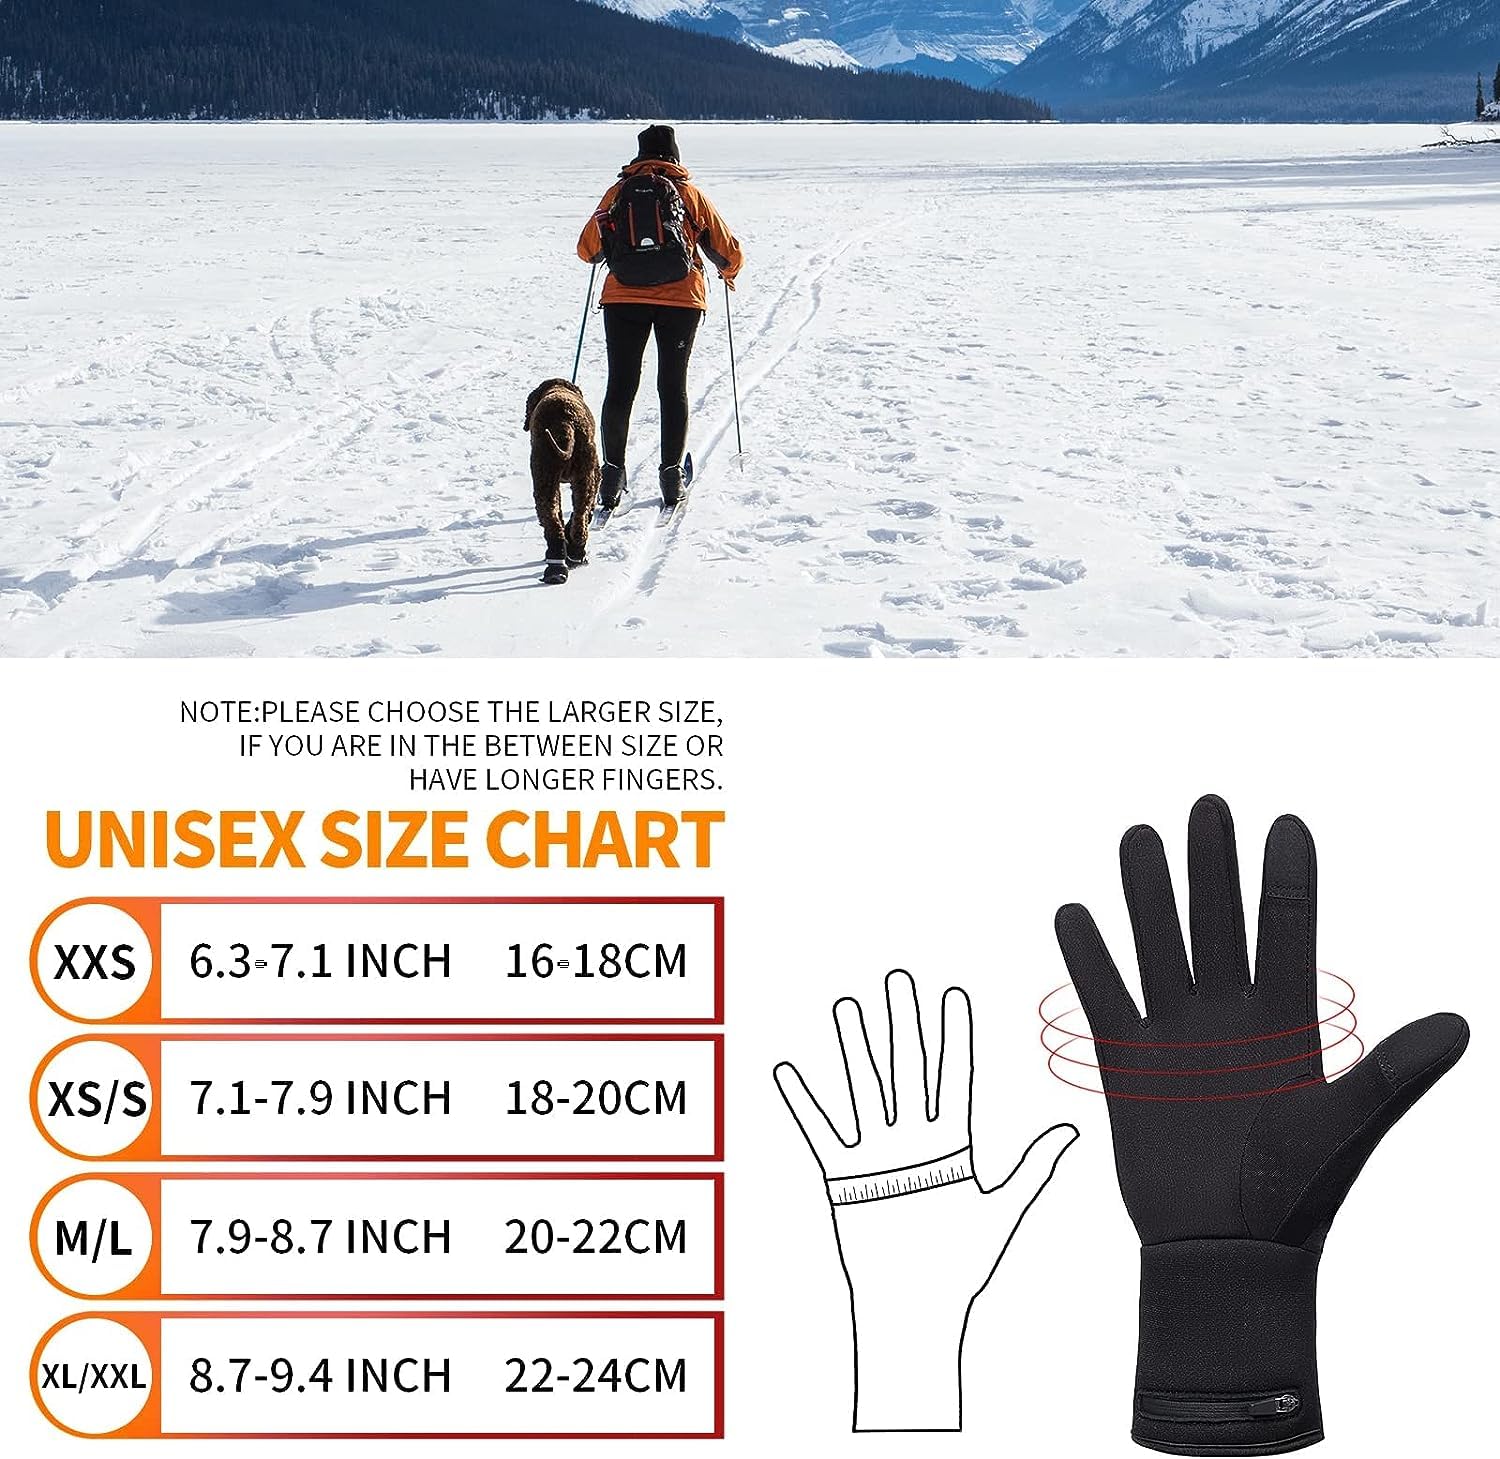 Heated Glove Liners for Men Women, Rechargeable Battery Electric Heated Gloves, Winter Warm Glove Liners for Arthritis Raynaud, Thin Gloves Riding Ski Snowboarding Hiking Cycling Hand Warmers